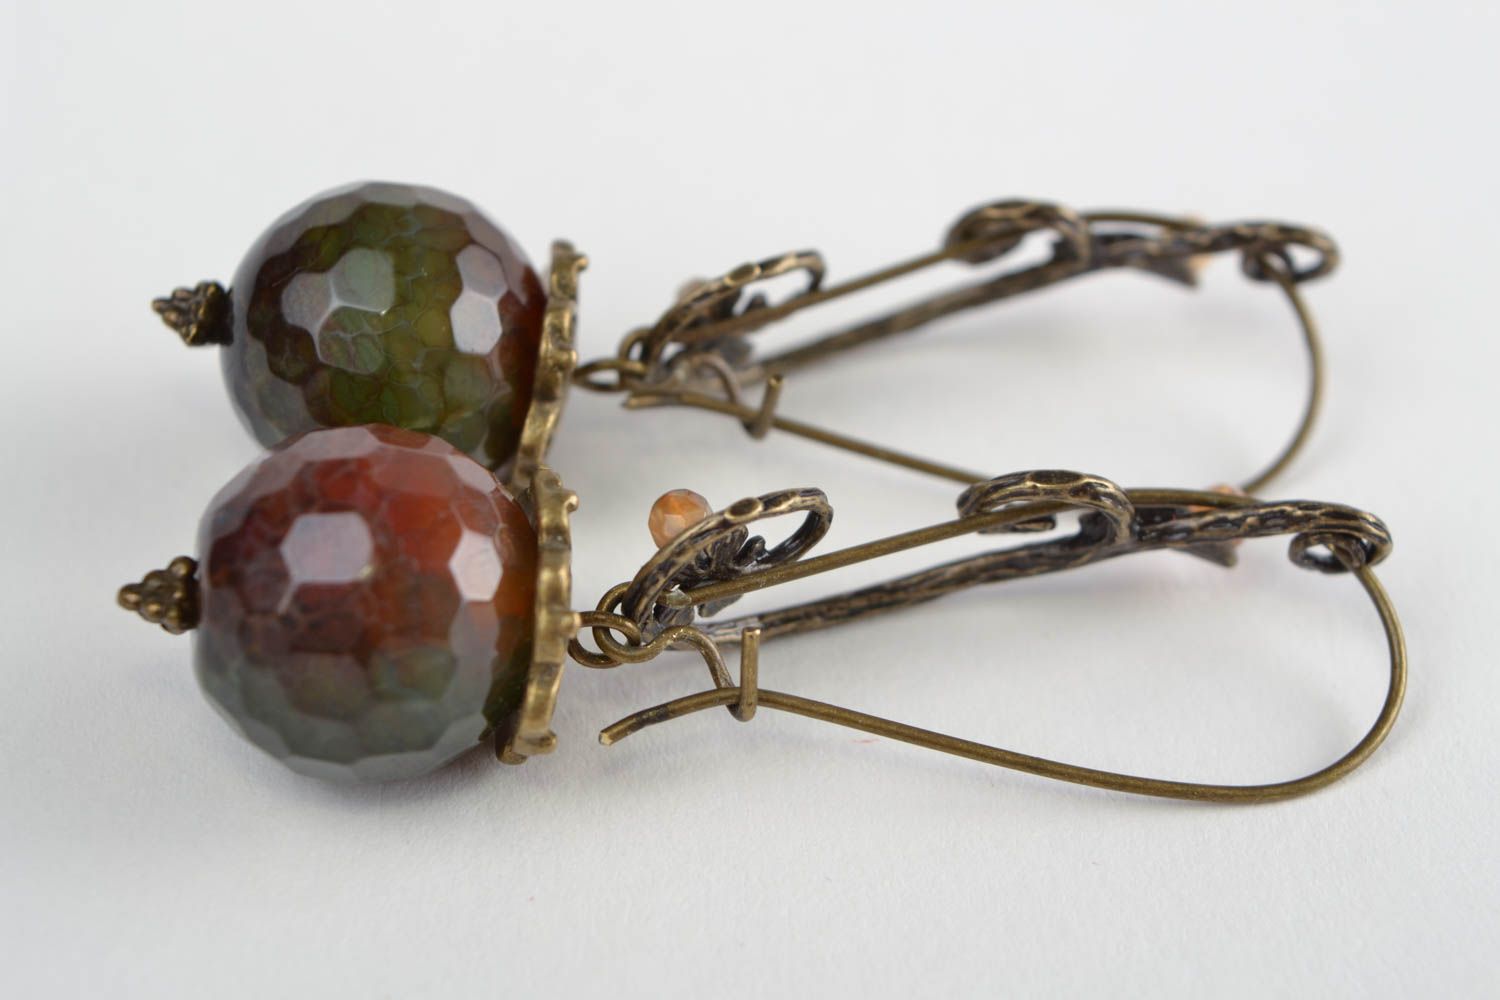 Handmade dangling earrings with fancy metal fittings and snake agate stone beads photo 5